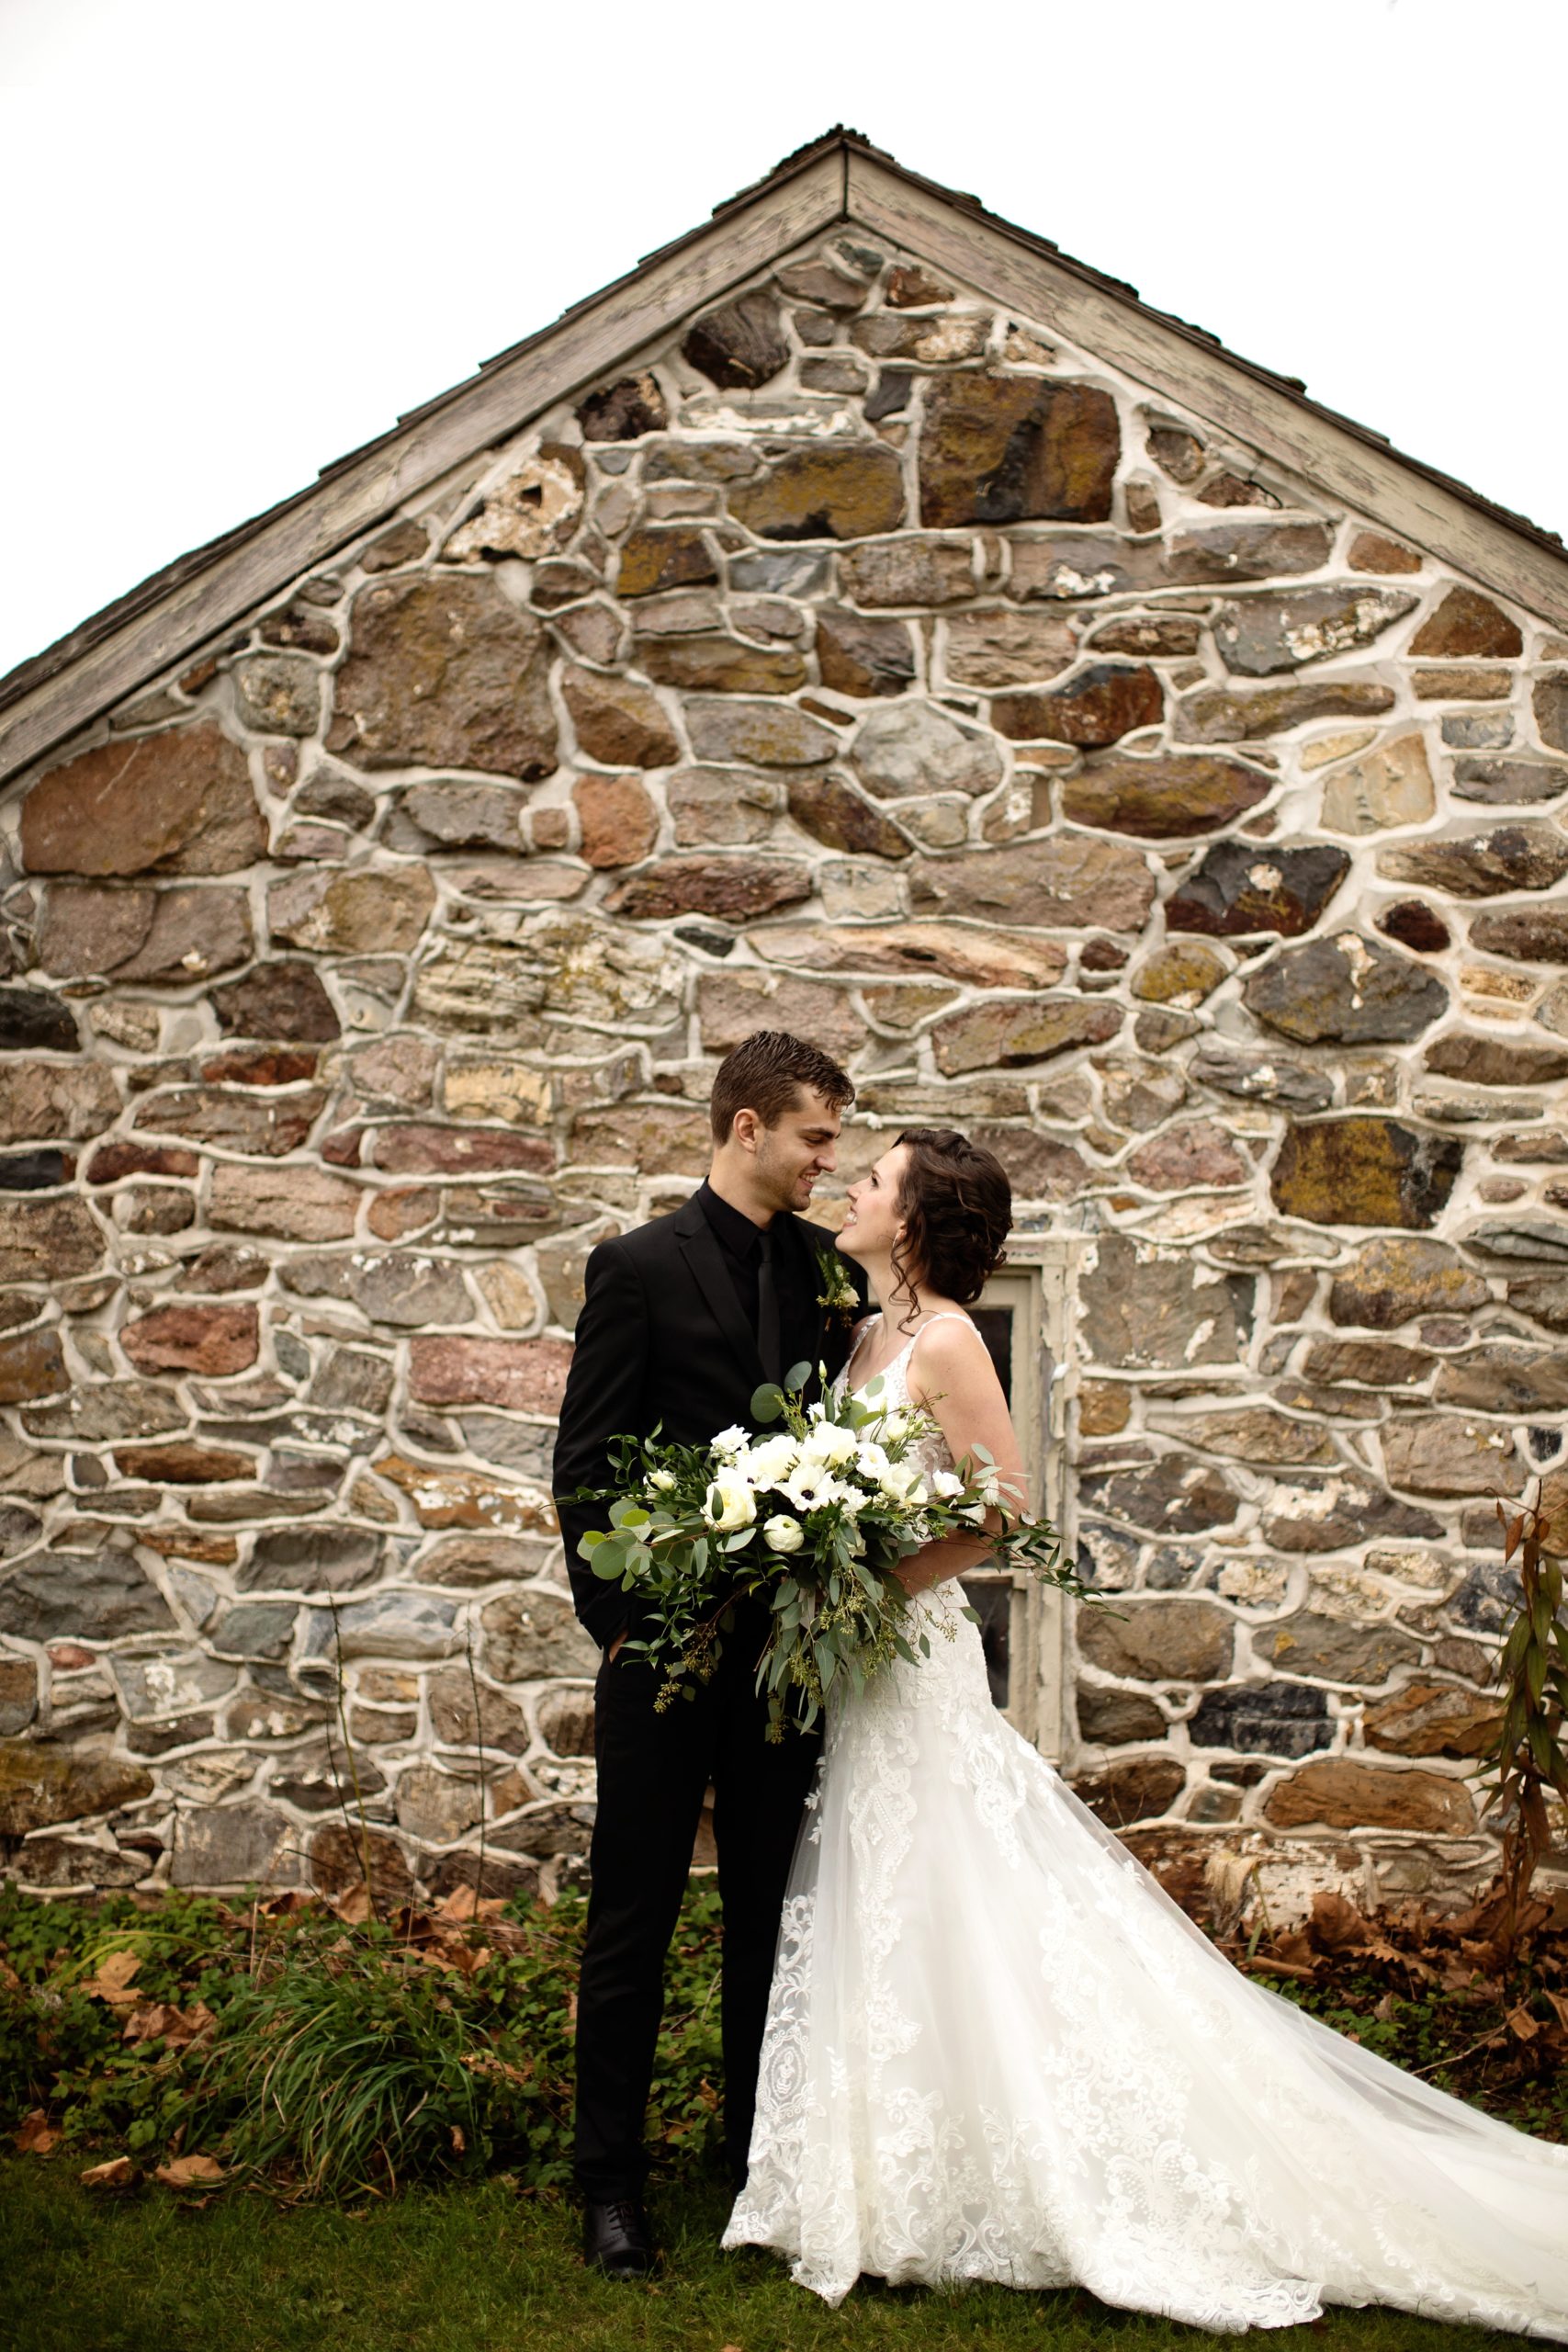 The Silk Mill on Main, Lancaster PA Industrial Wedding Venue, and Poole Forge Lancaster PA Wedding